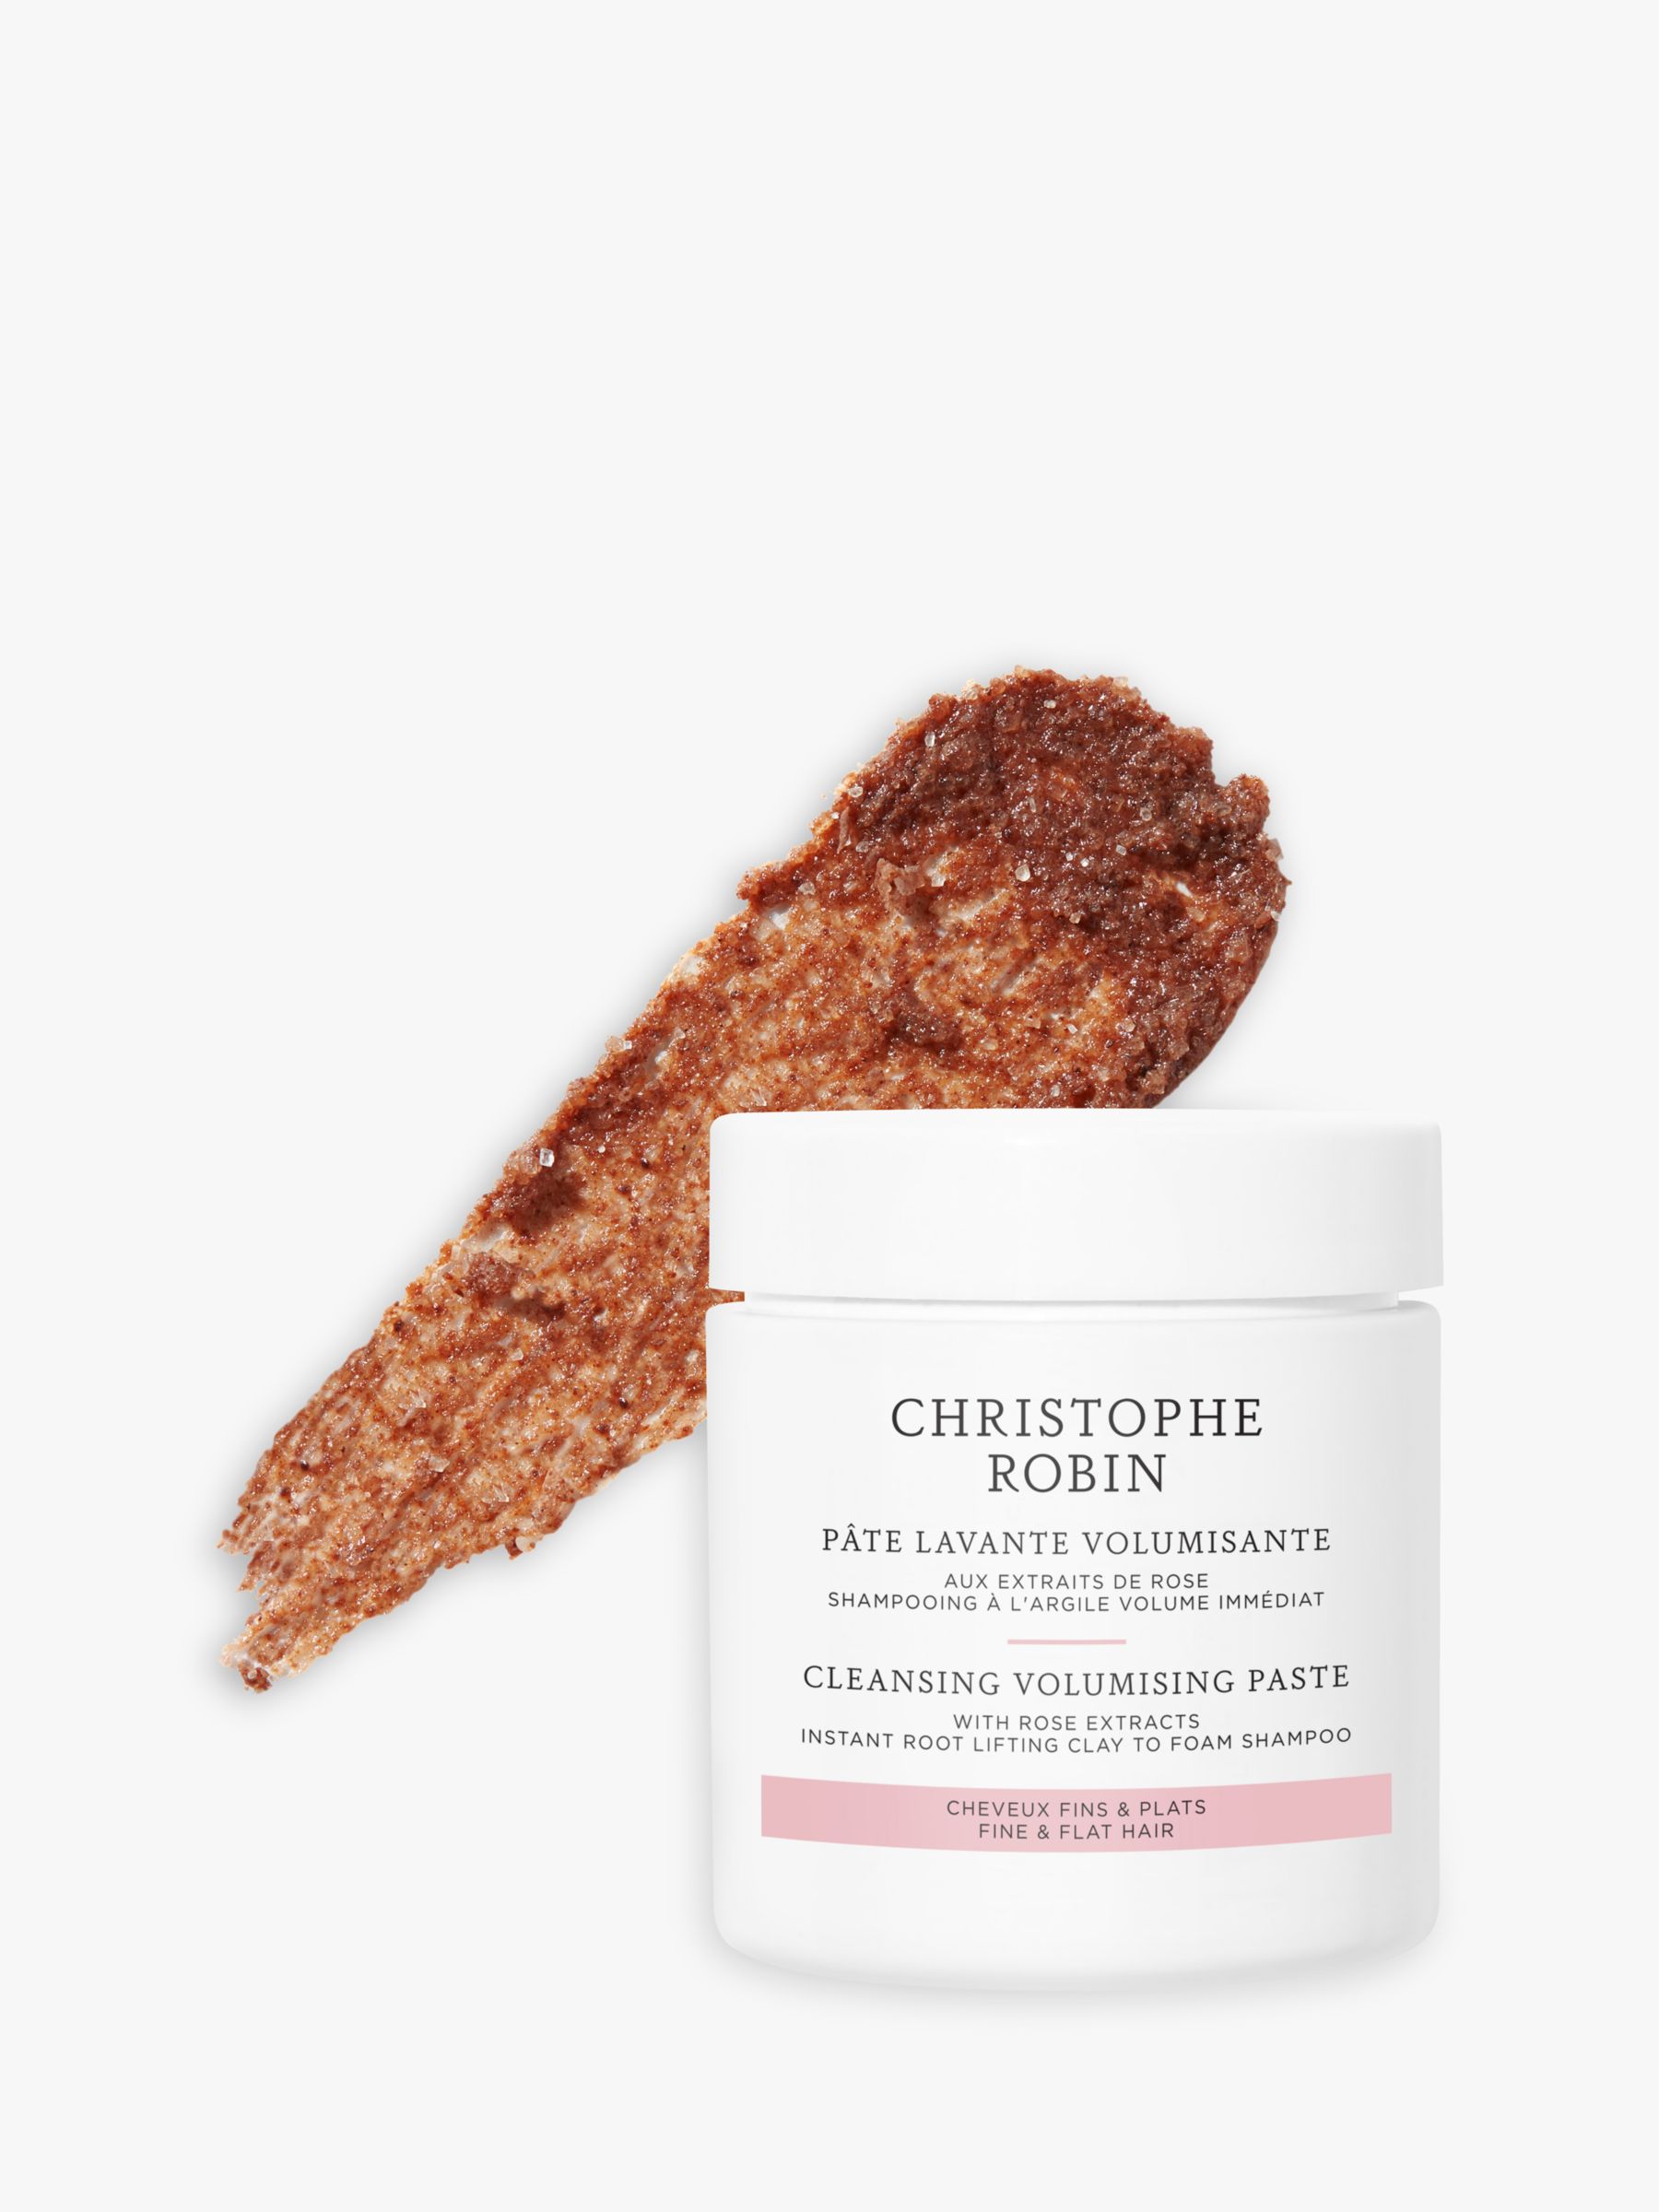 Christophe Robin Cleansing Volumising Paste with Rose Extracts, 75ml 1